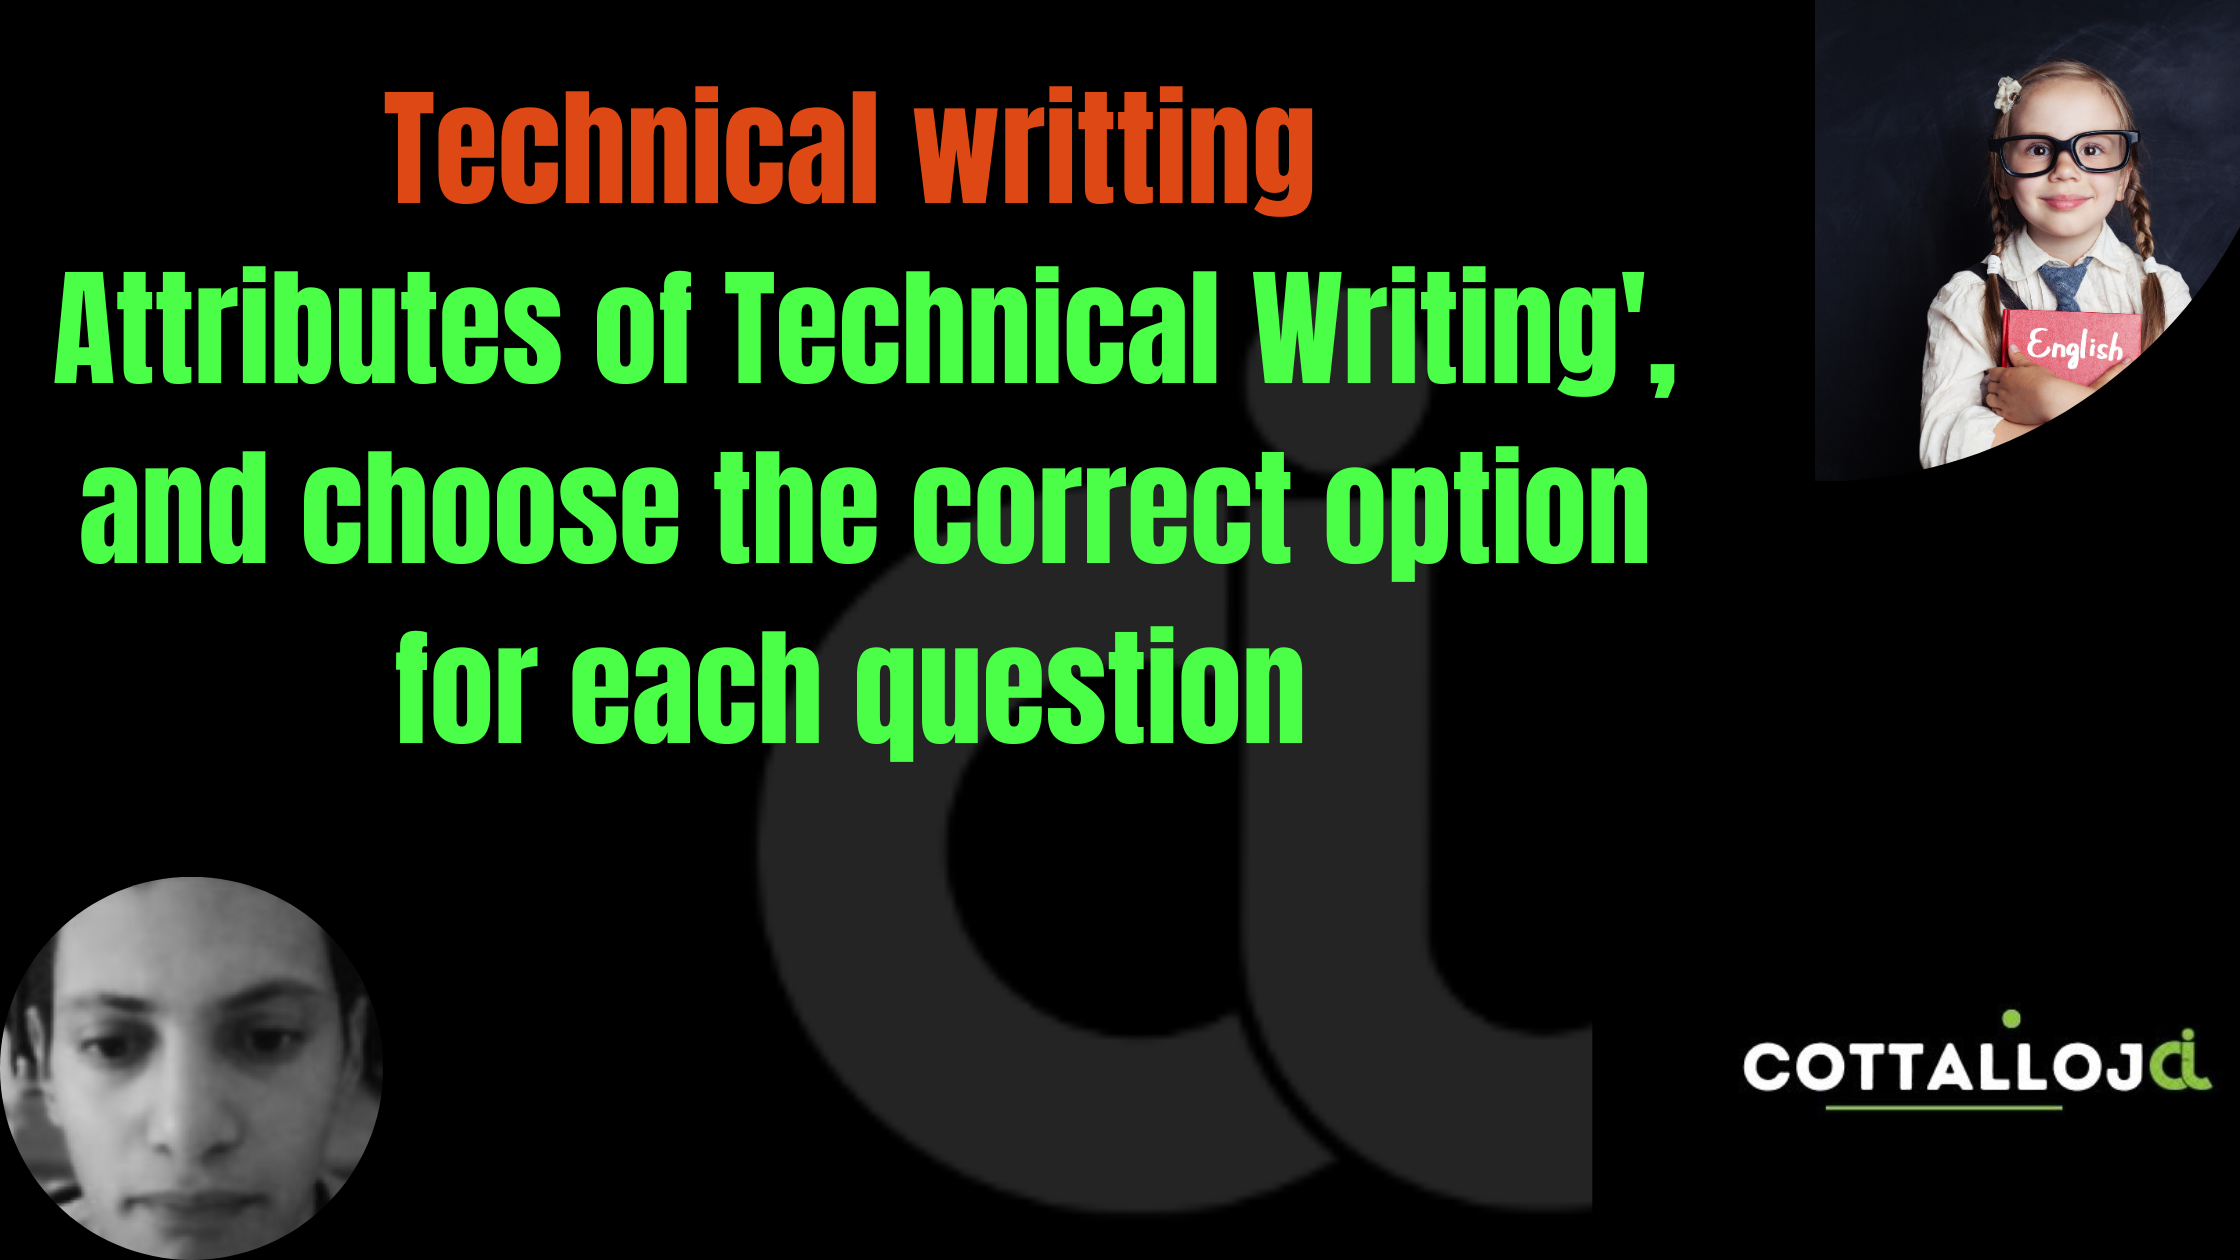 Attributes of Technical Writing', and choose the correct option for each question